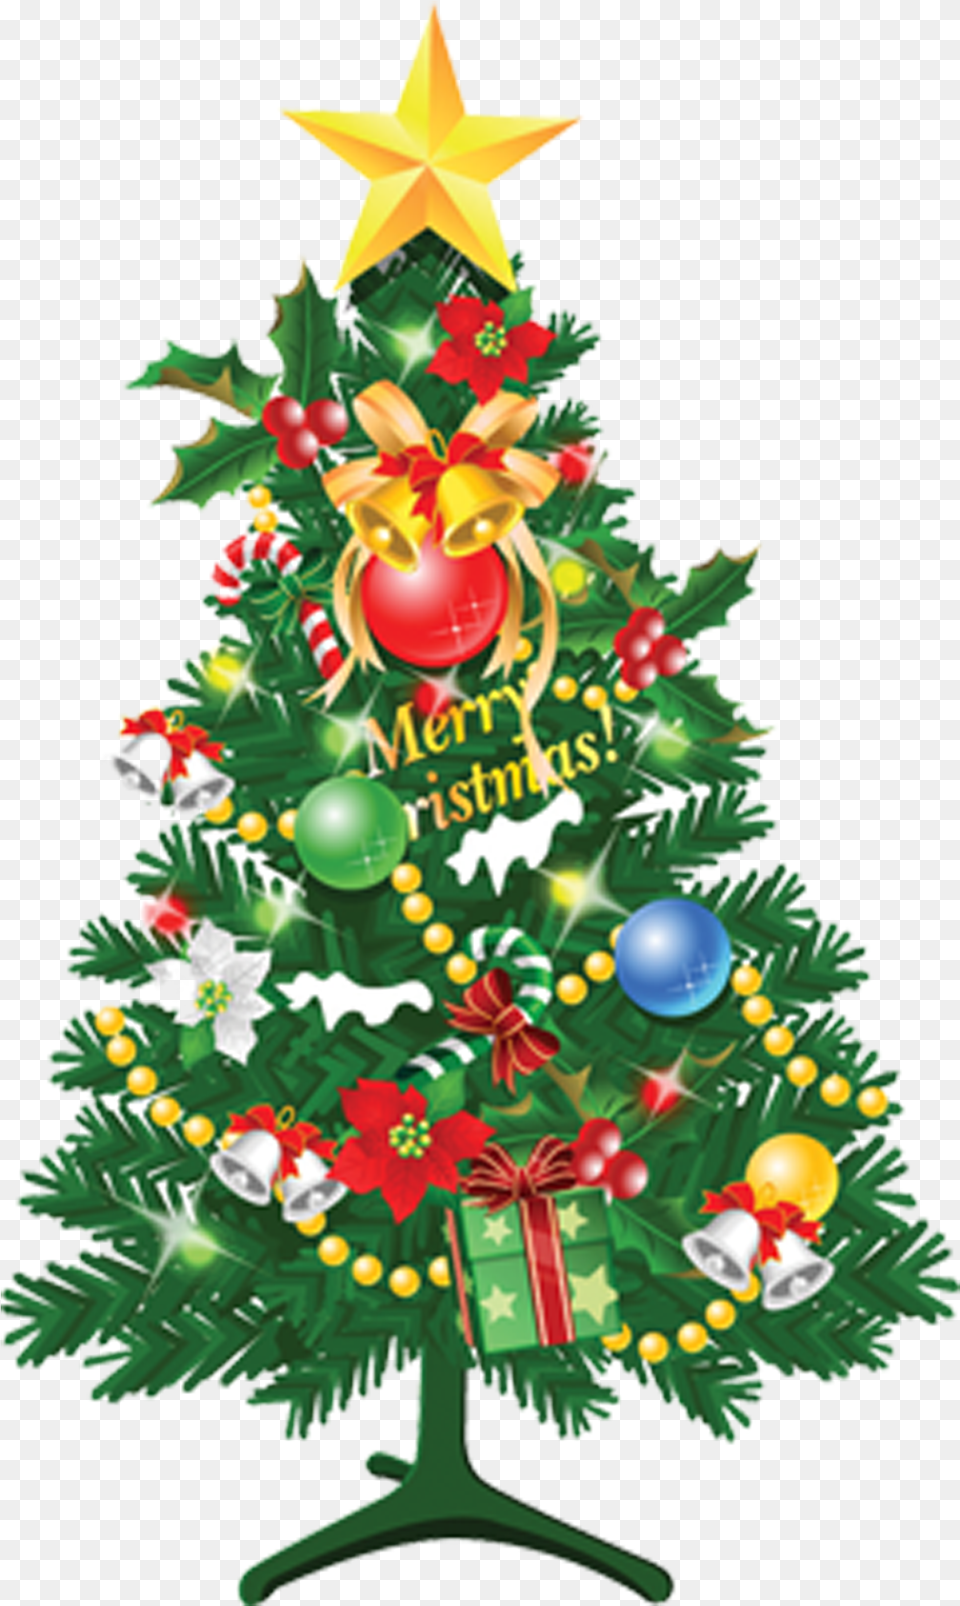 Library Of Griswolds Christmas Freeuse Christmas Tree With Candy Canes, Christmas Decorations, Festival, Plant, Christmas Tree Free Transparent Png